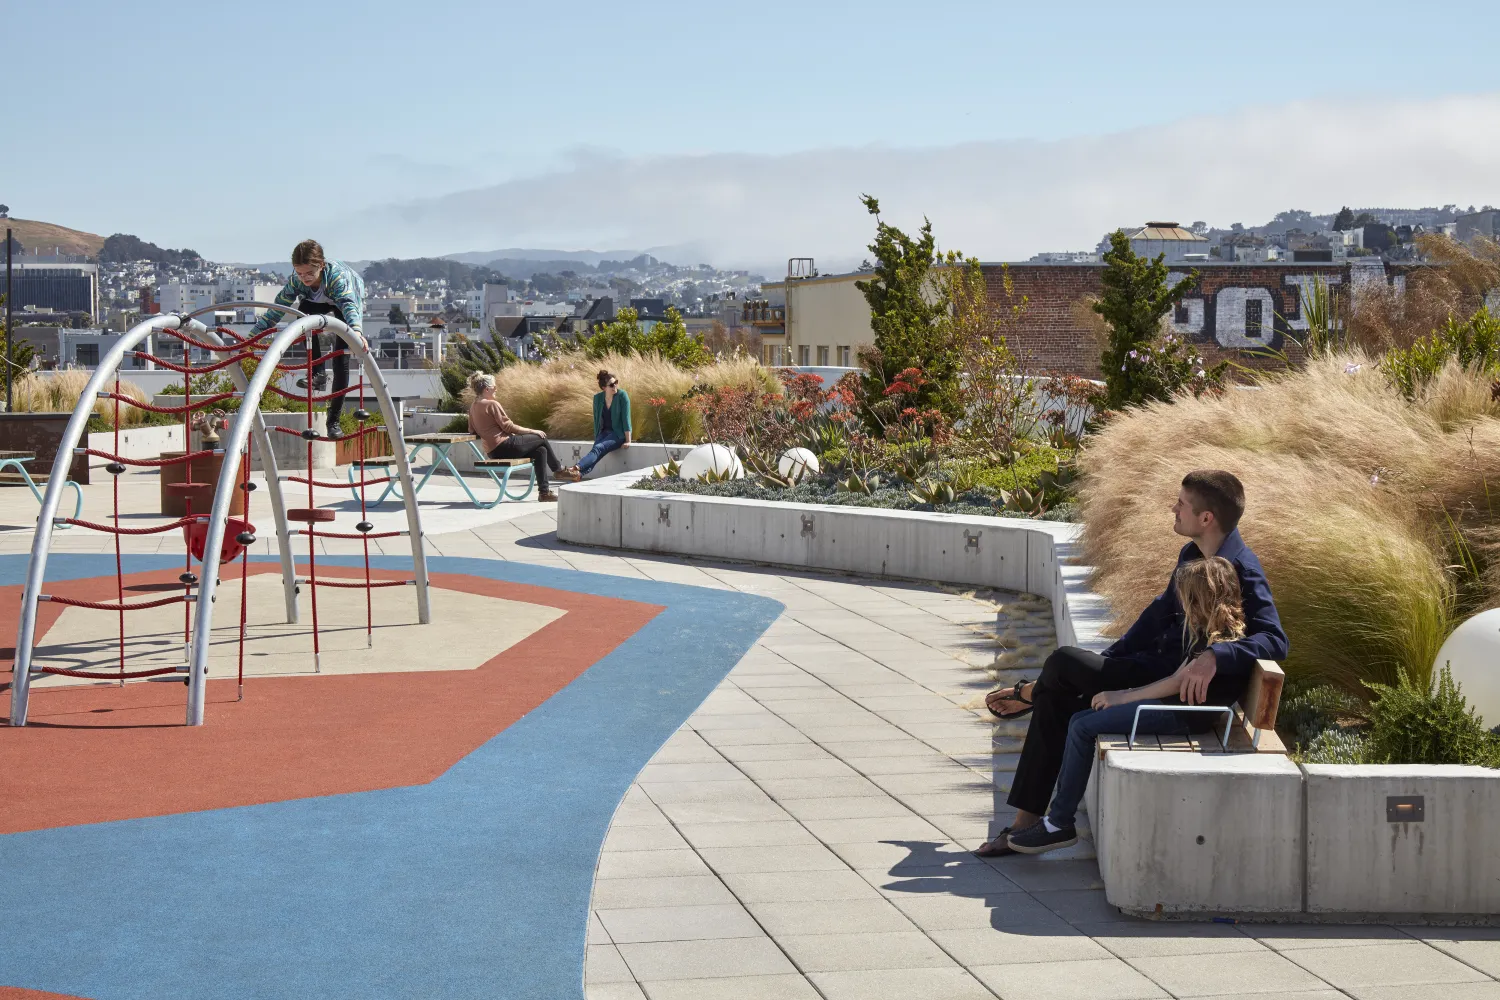 Rooftop playground on La Fénix at 1950, affordable housing in the mission district of San Francisco.